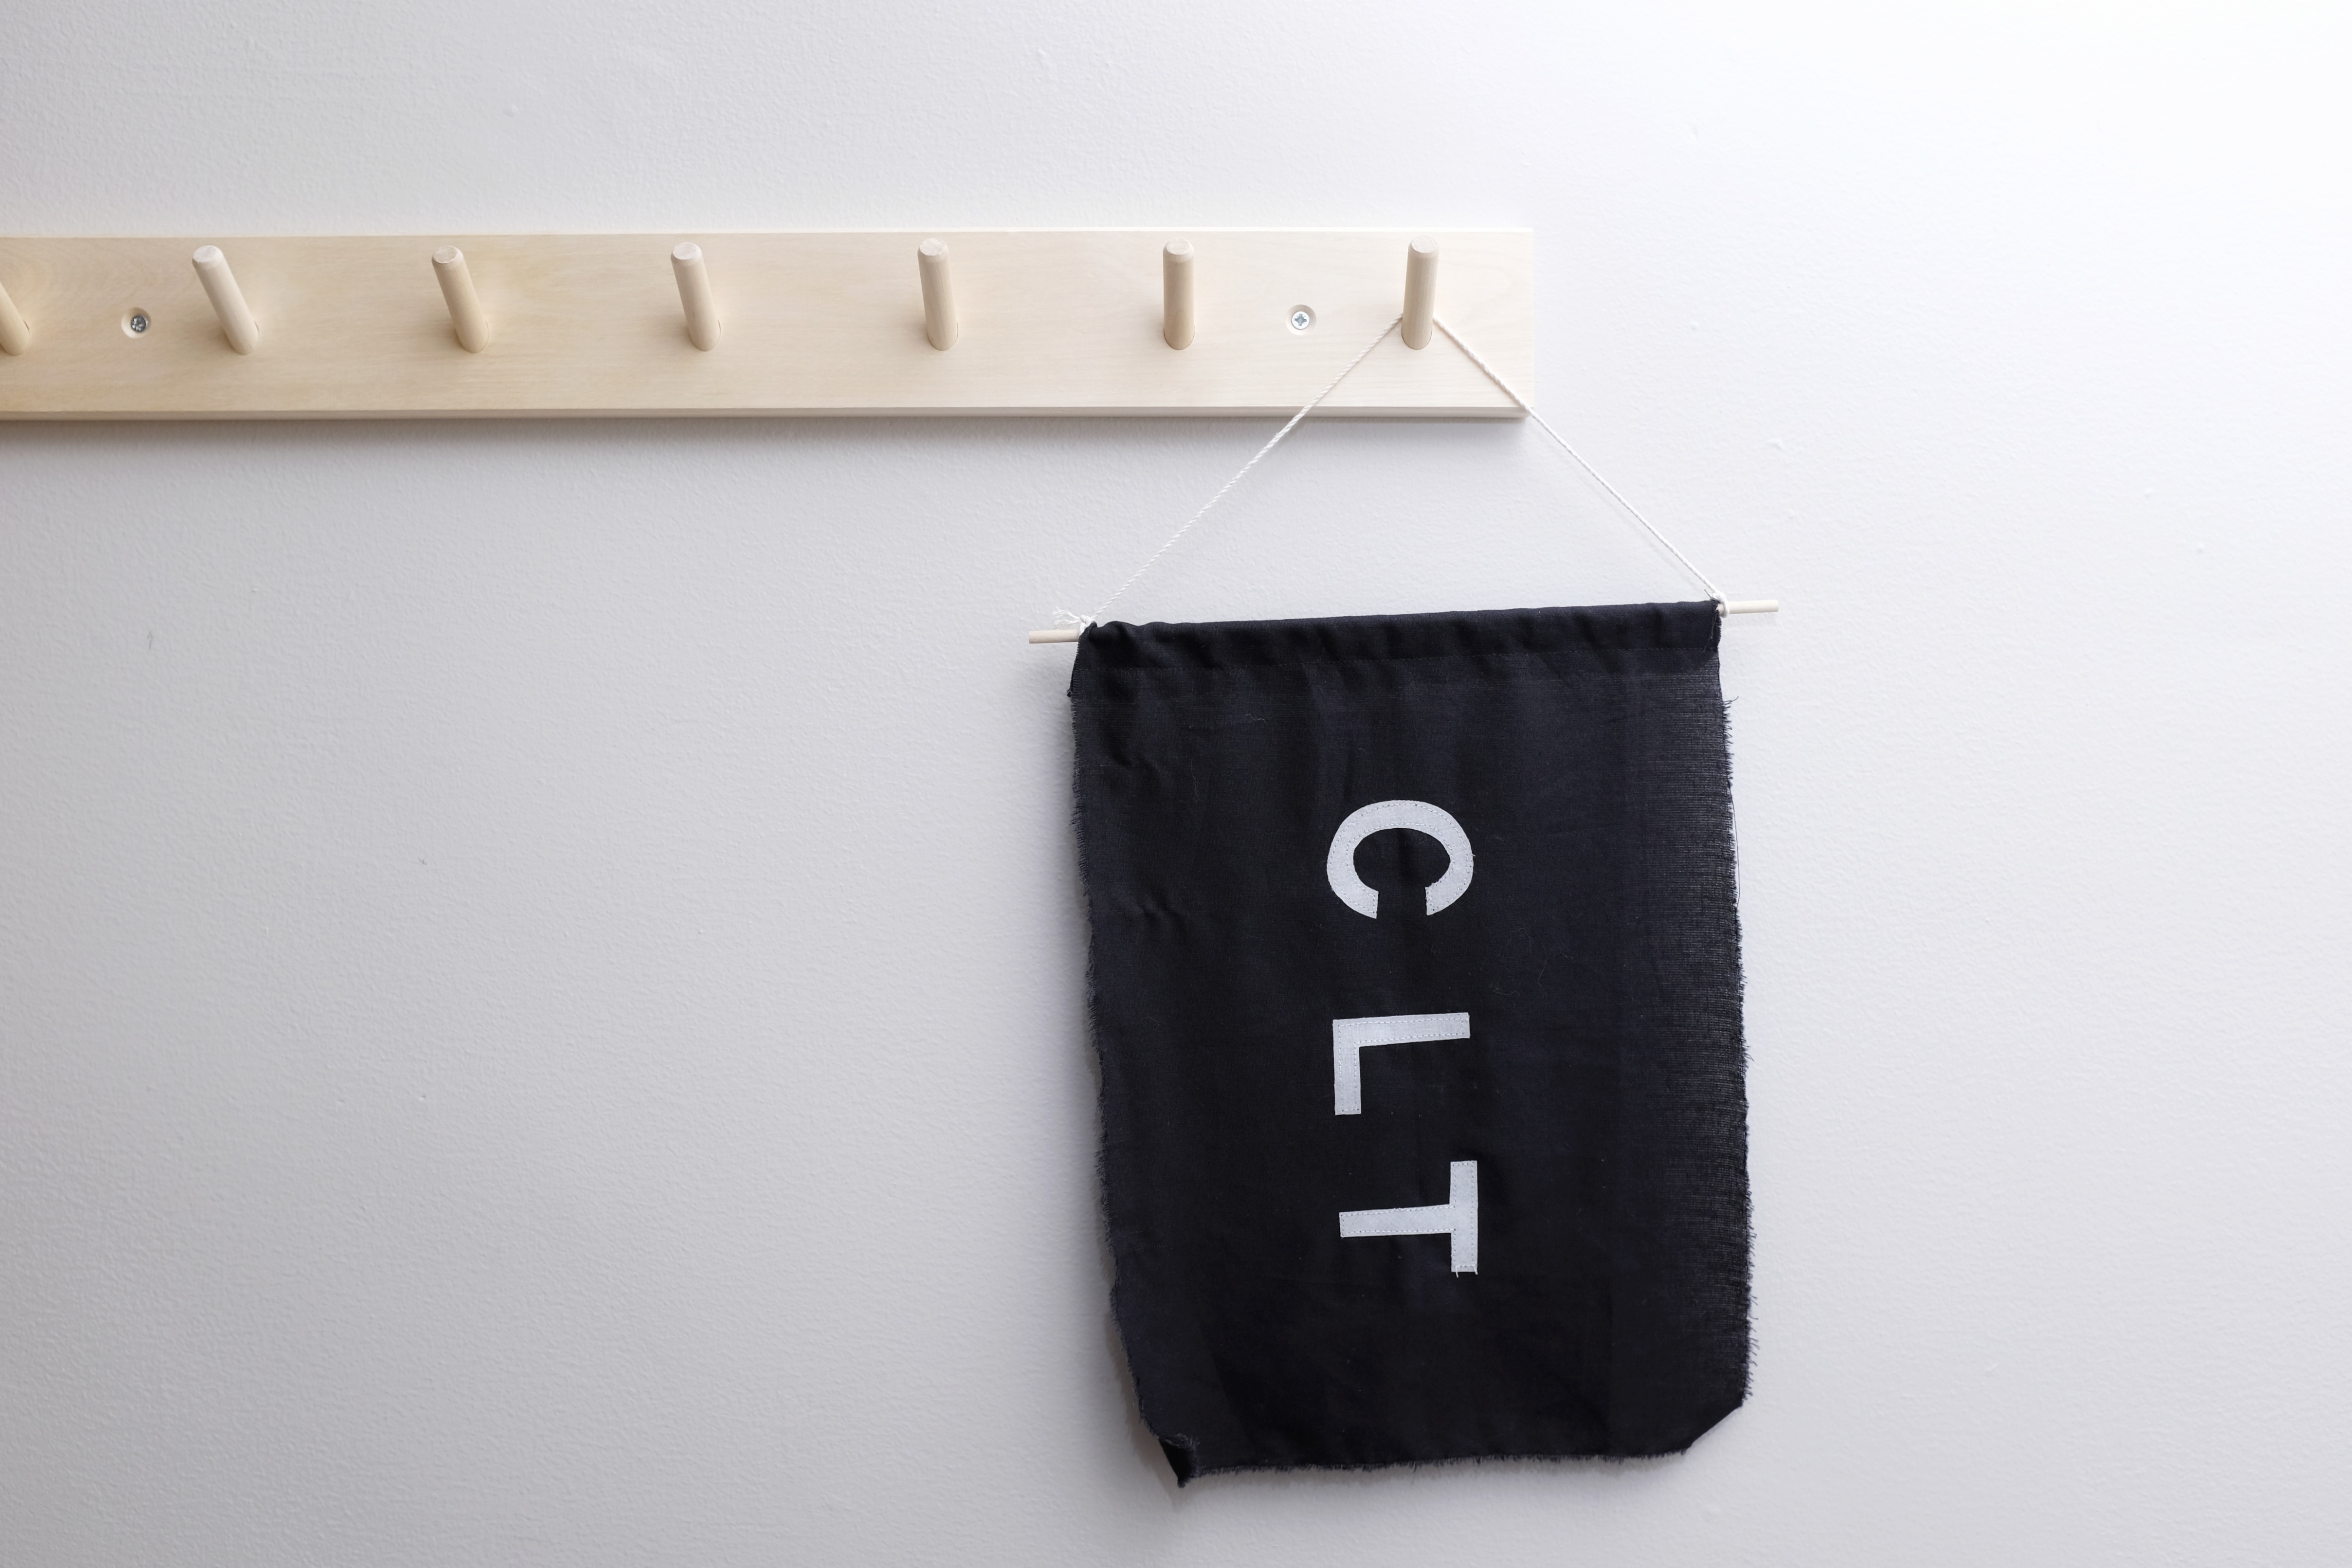 Banner that says "CLT" on a wooden peg rail